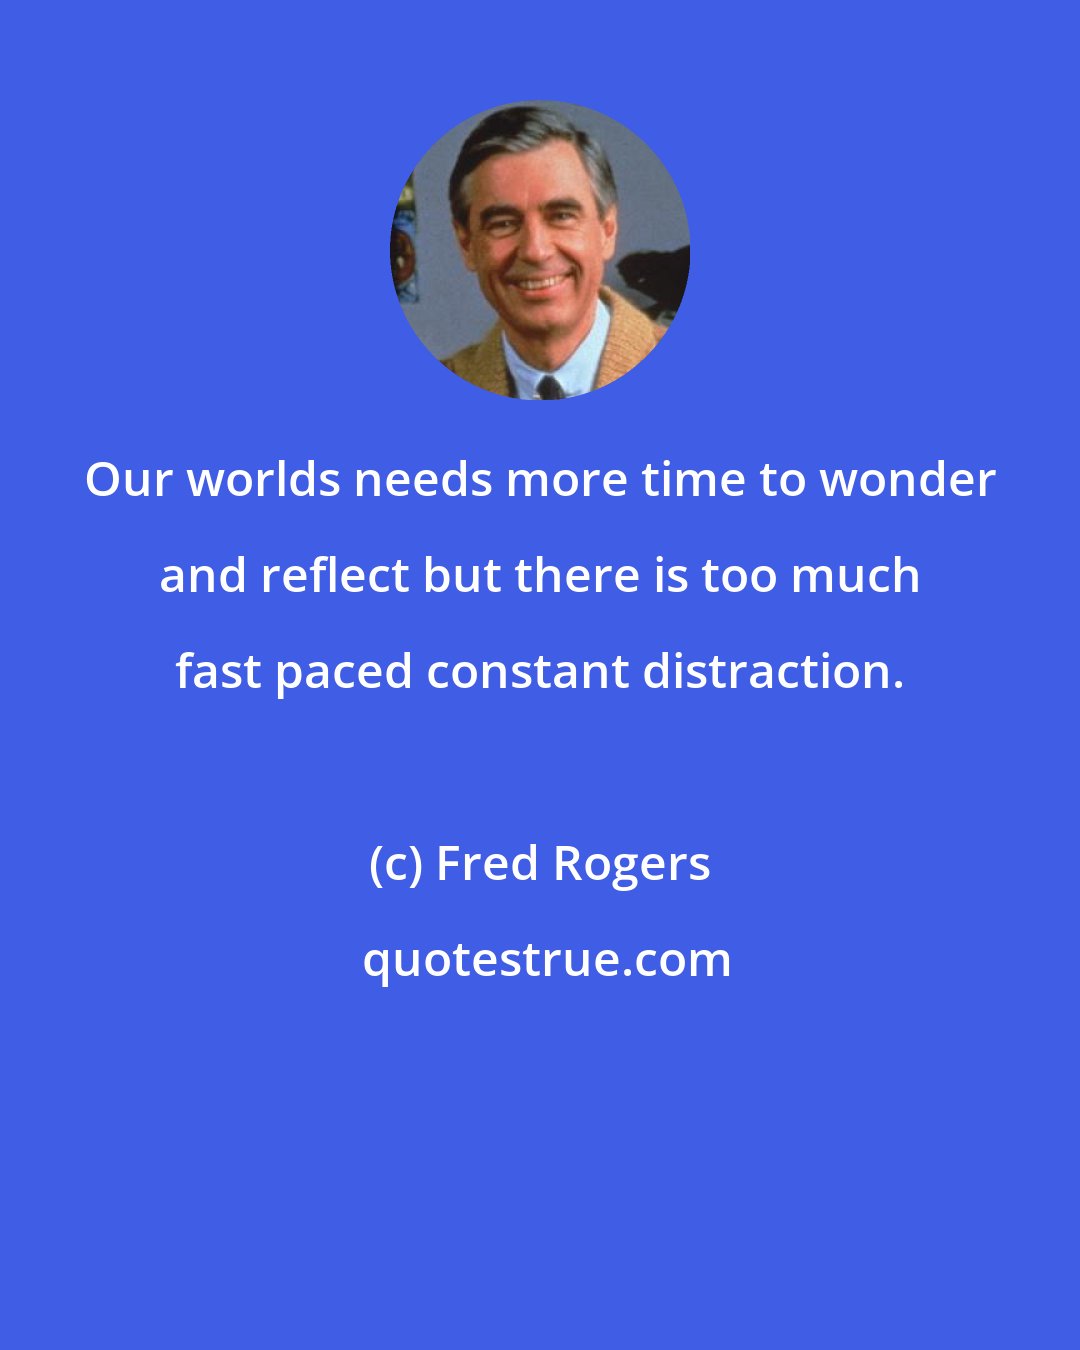 Fred Rogers: Our worlds needs more time to wonder and reflect but there is too much fast paced constant distraction.